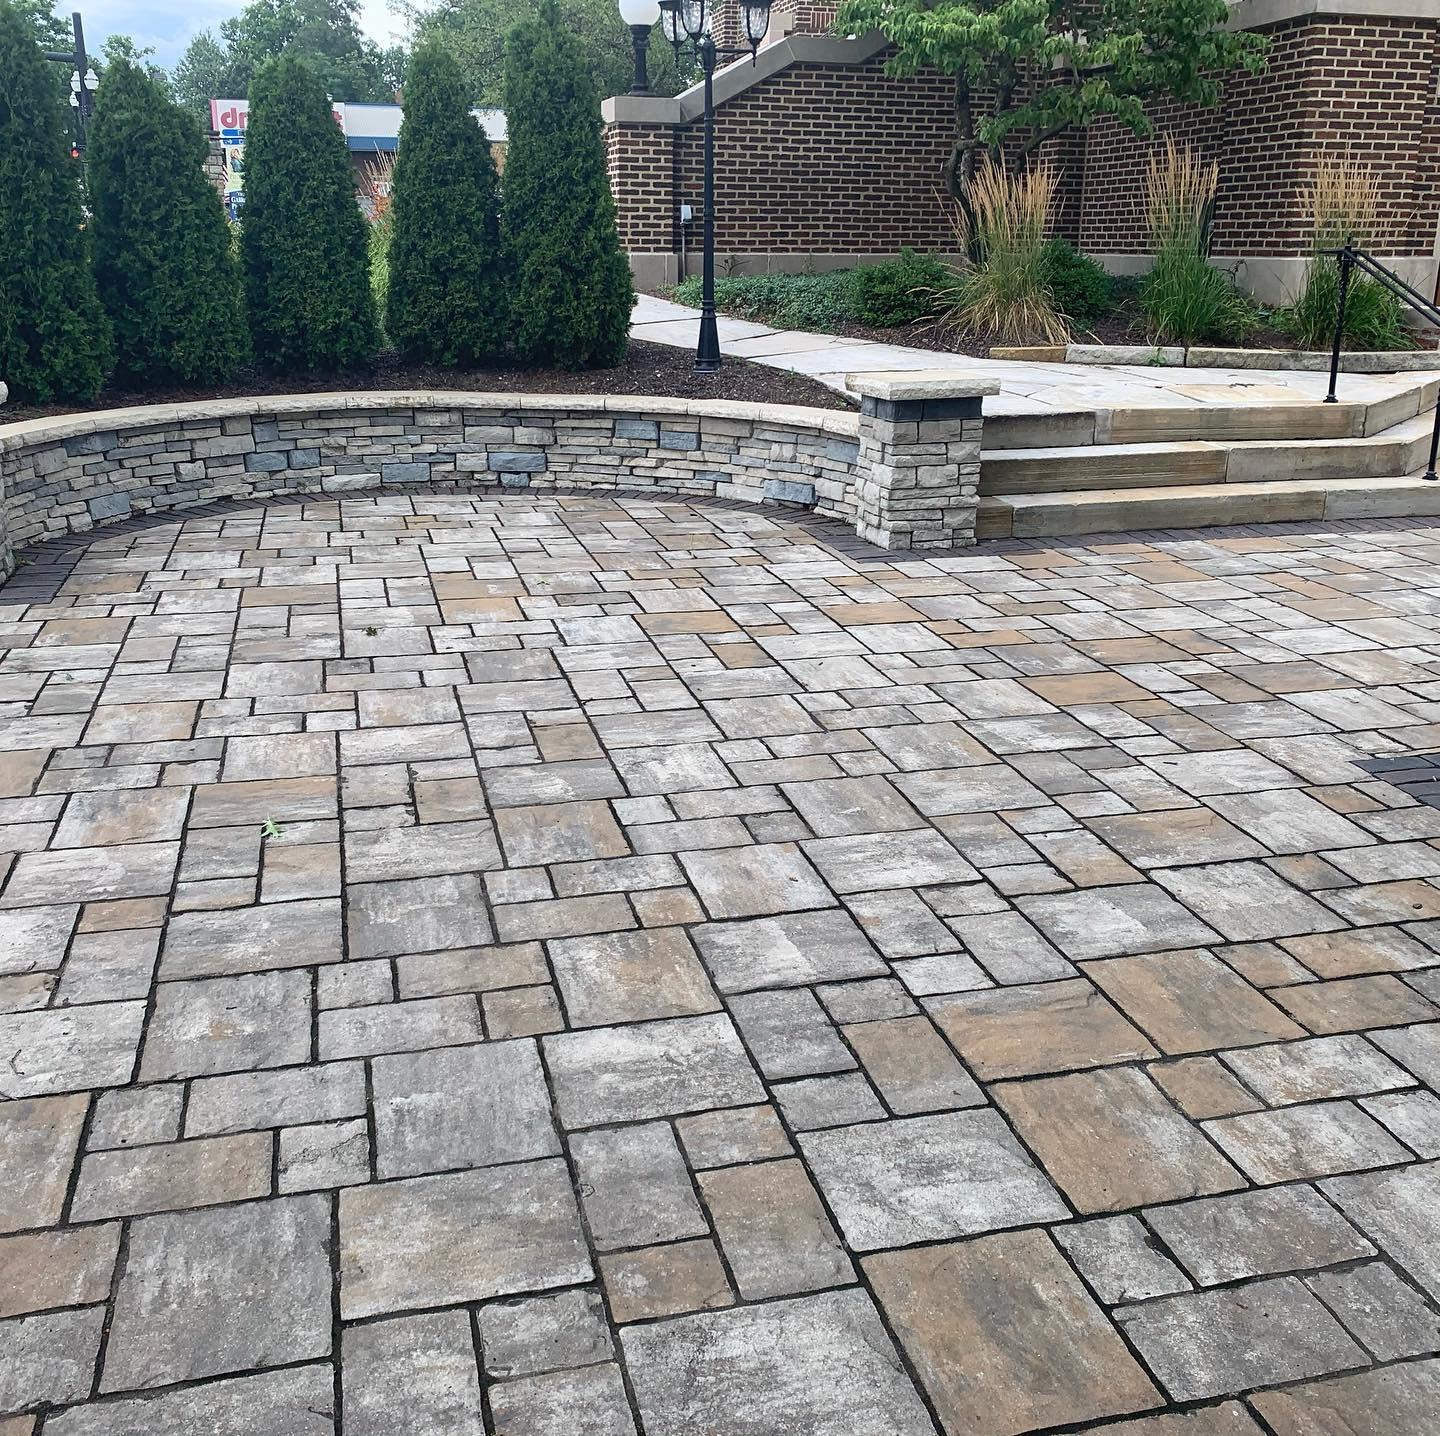 Over the years he attracted similarly talented individuals and his crews and scope of operation grew. As a full-service, one-stop-shop operation, our crews offer everything from lawn maintenance to snow removal, lawn mowing service, mulching service, lawn fertilization, design, installation and construction of softscapes and hardscapes.